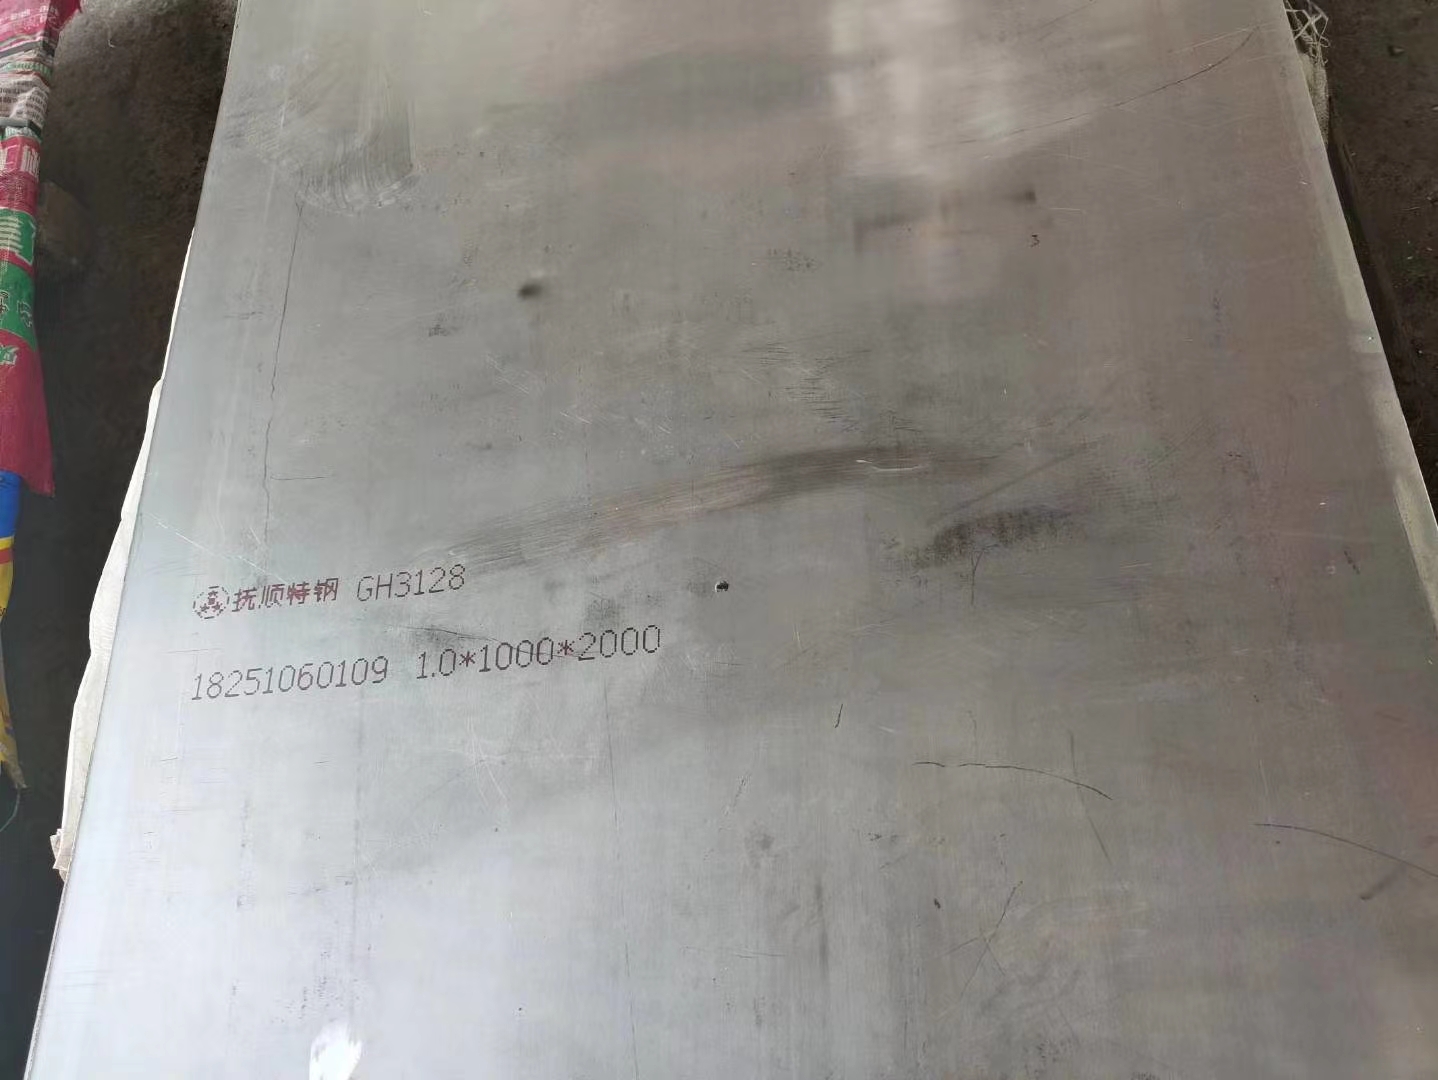 Quality Inspection for Welded Decorate Stainless Steel Tube - GH3128 plate/sheet – Cepheus